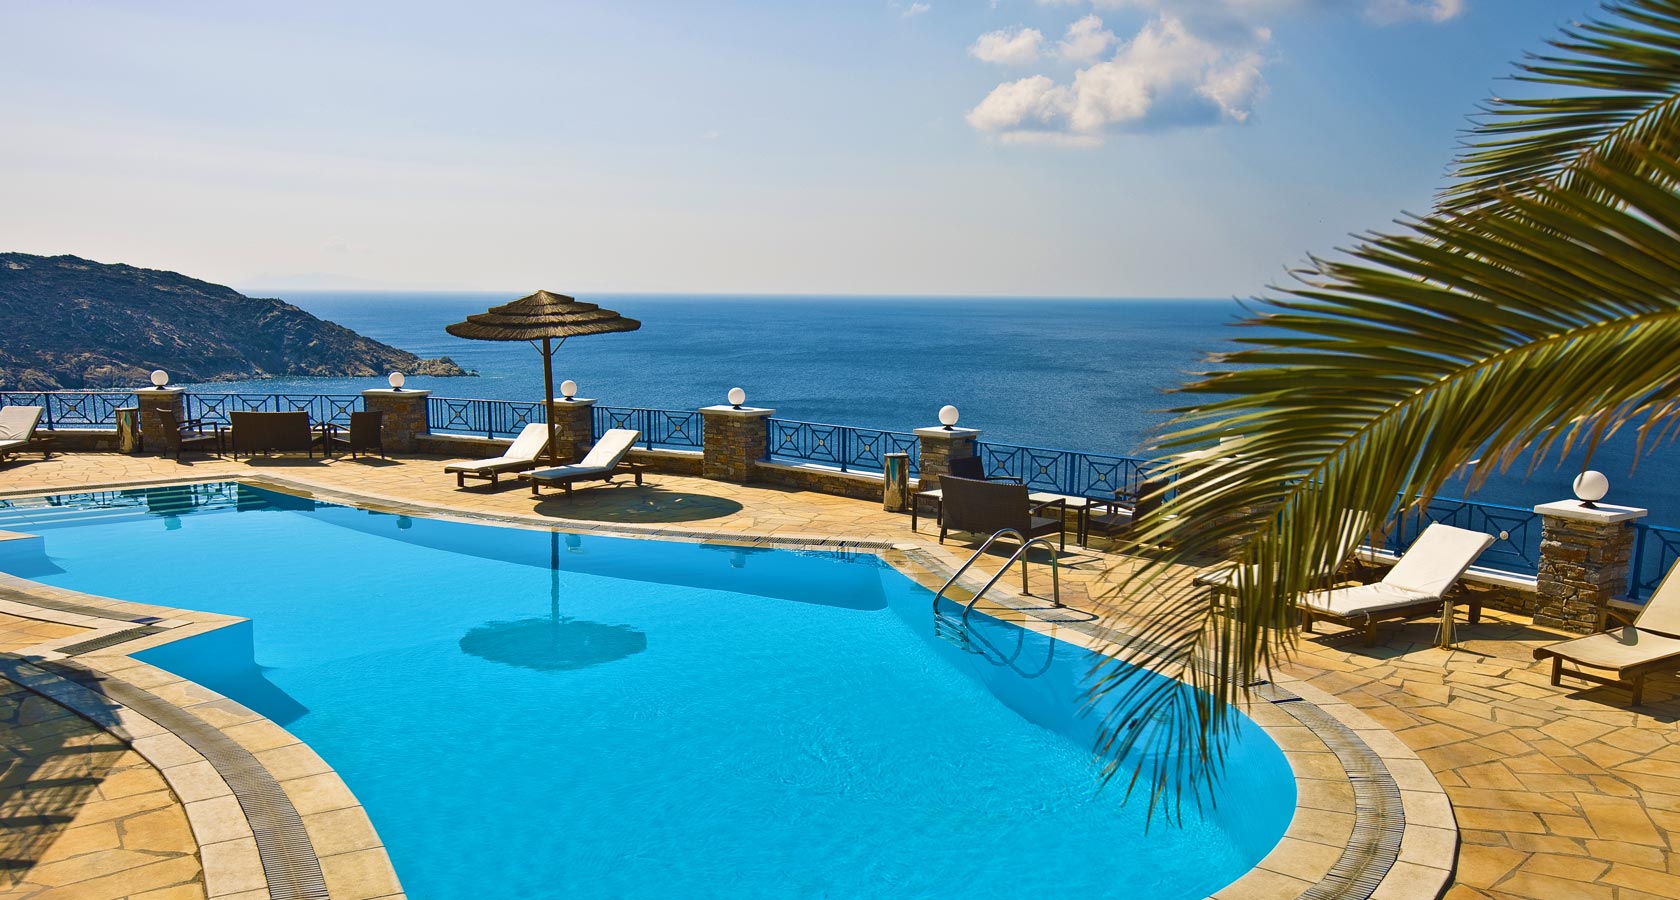 The Pool and Sea View of Hermes on Ios Island Greece